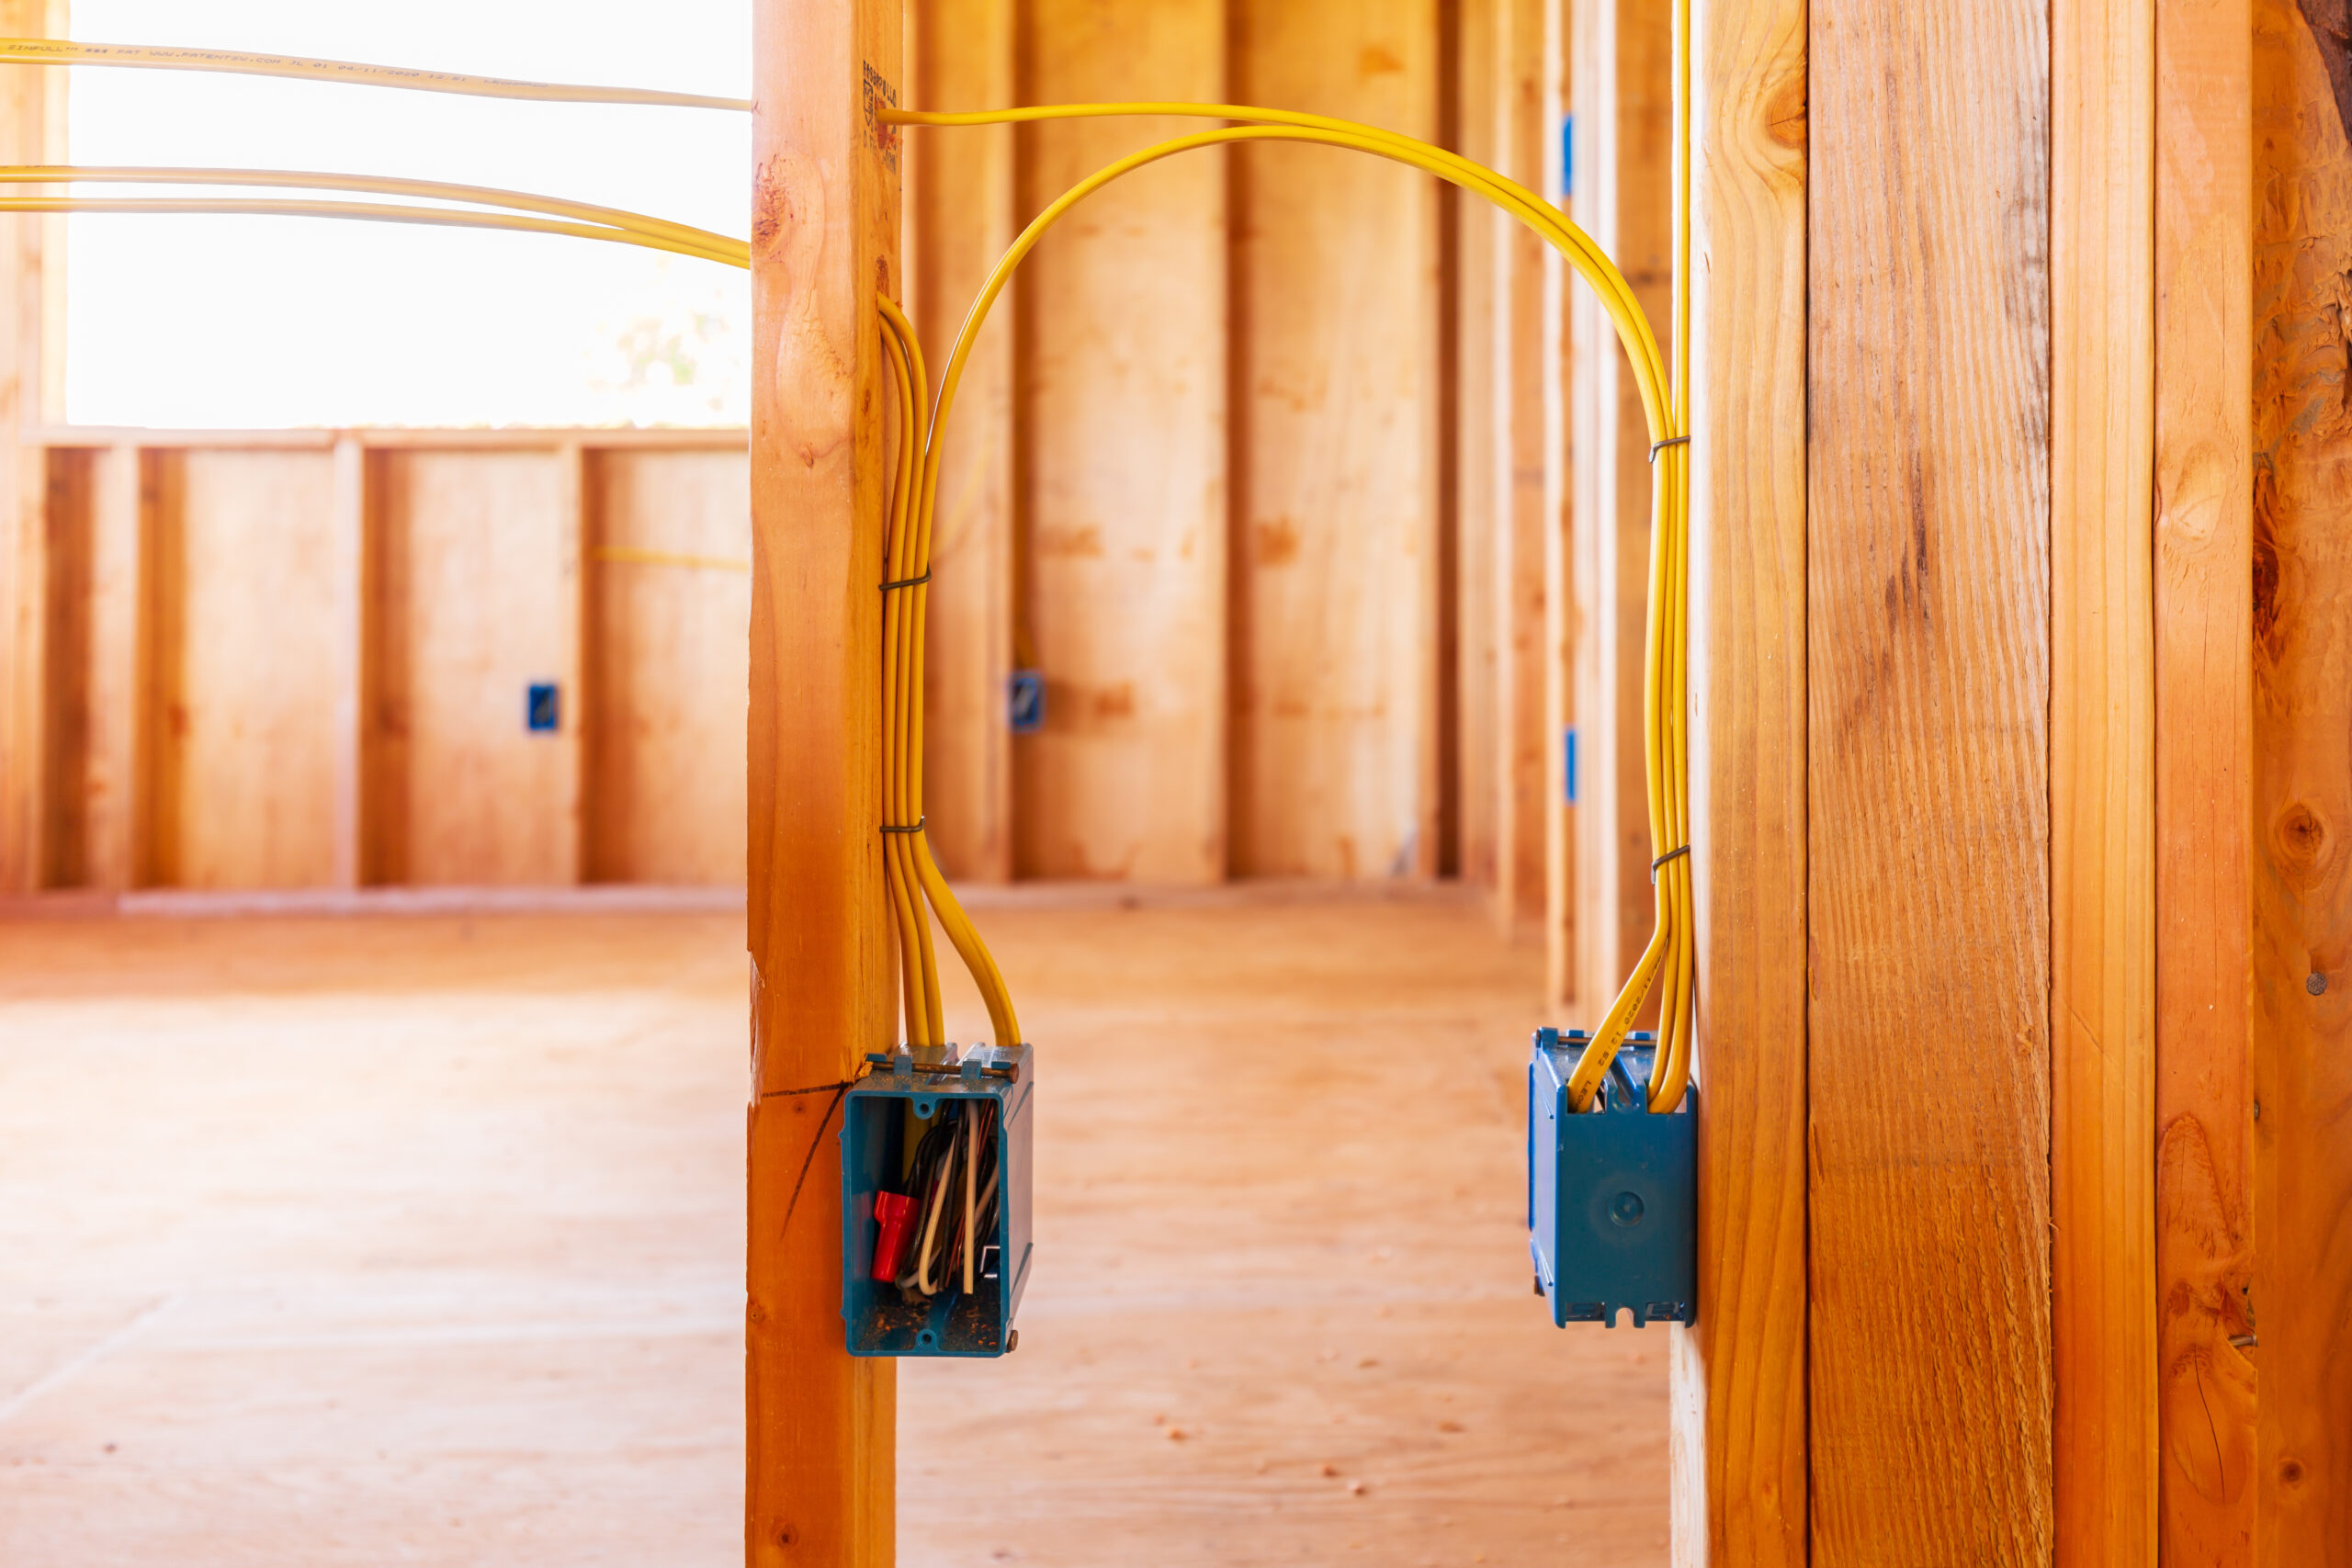 This is a picture for a blog about residential electrical wiring in new construction with JMC Electric.